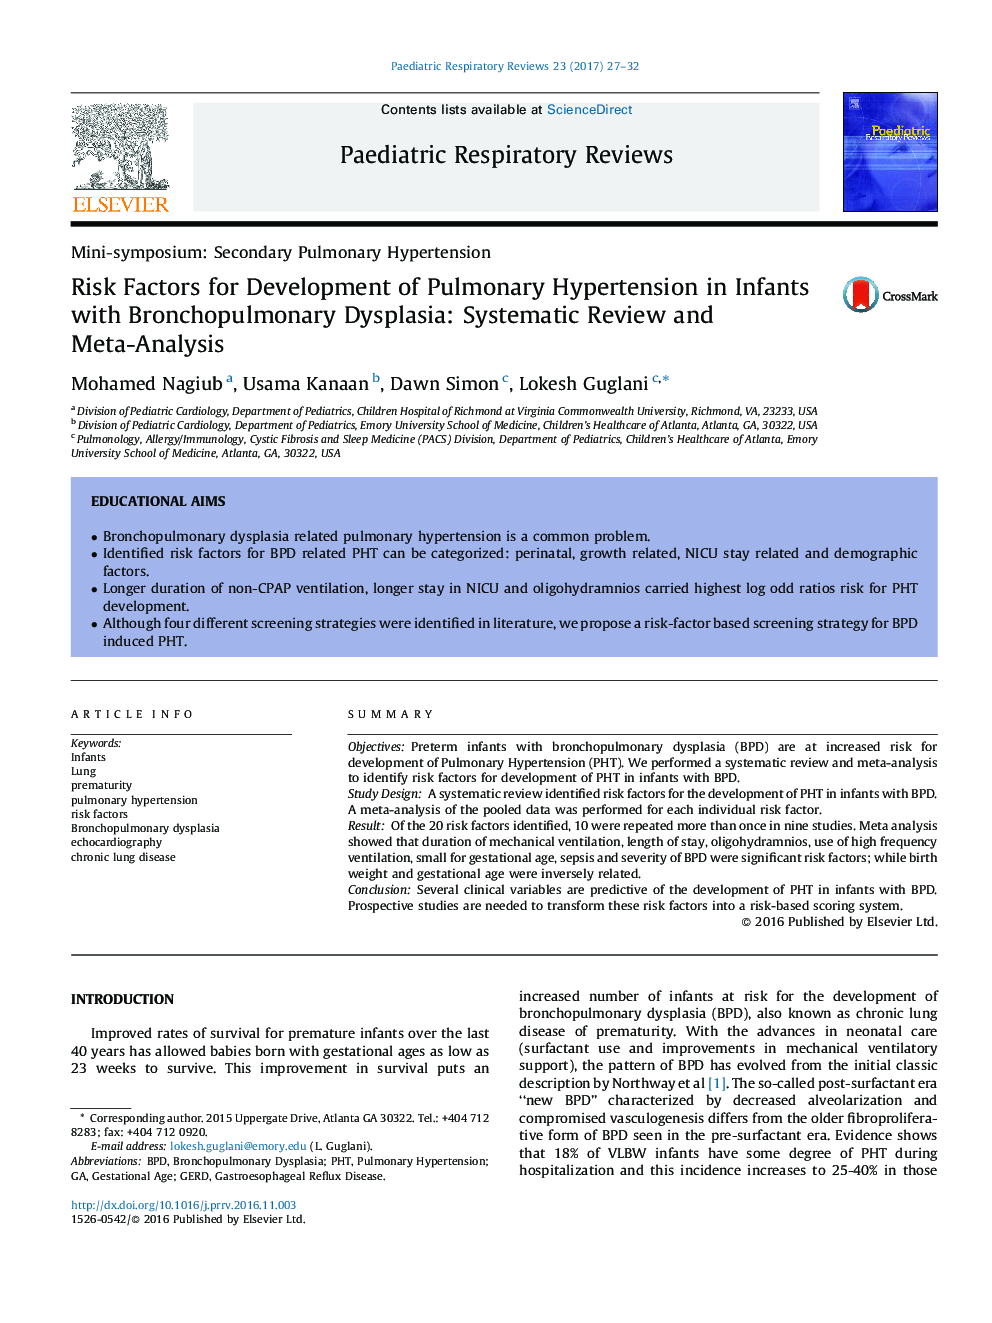 Mini-symposium: Secondary Pulmonary HypertensionRisk Factors for Development of Pulmonary Hypertension in Infants with Bronchopulmonary Dysplasia: Systematic Review and Meta-Analysis